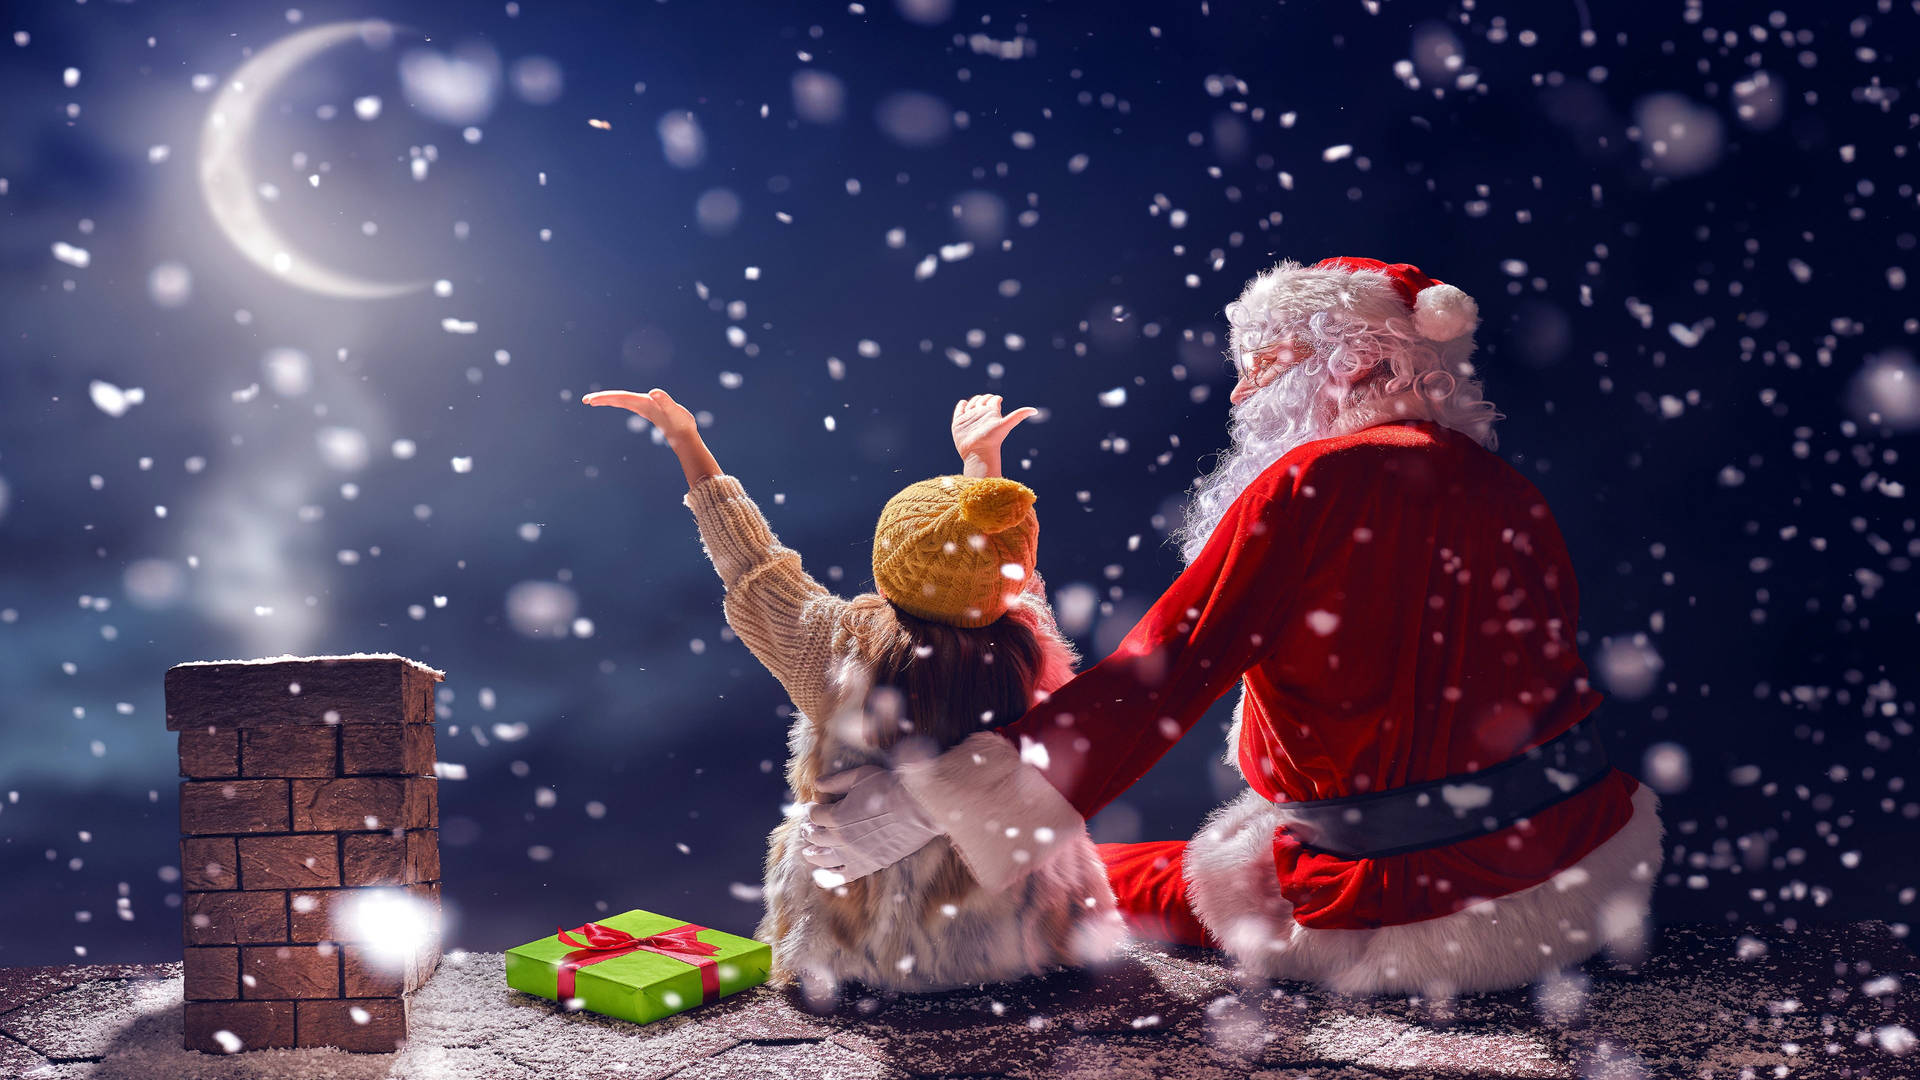 Santa Claus And Girl On Rooftop Wallpaper